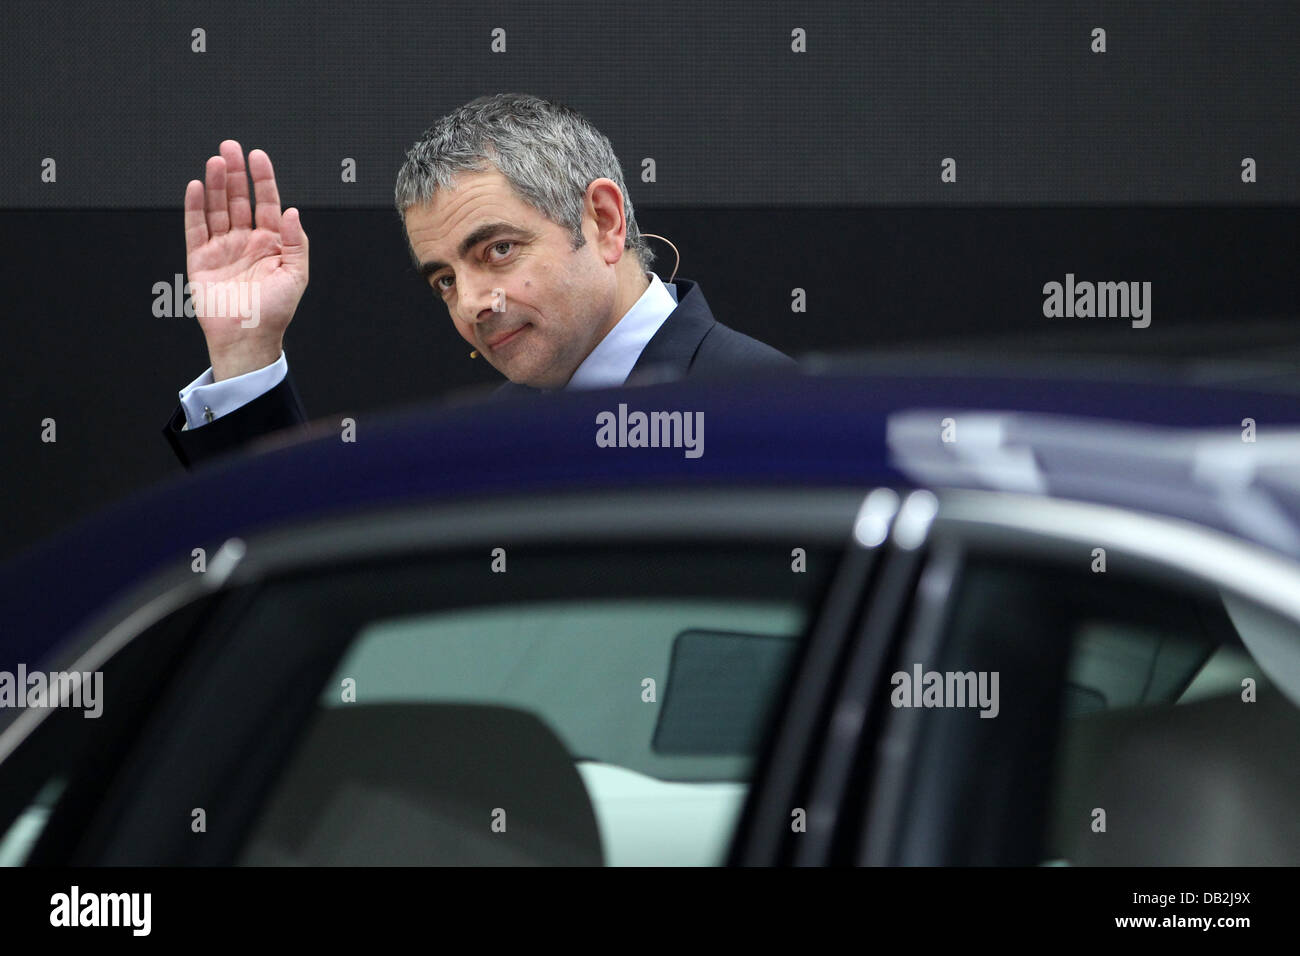 Comedian Rowan Atkinson (Mr. Bean) presents the new Rolls-Royce 'Ghost' at the International Motor Show IAA in Frankfurt Main, Germany, 13 September 2011. From 15 to 25 September 2011 exhibitors from all over the world will present new trends of the automotive industry, headed by electronic mobility and hybrid vehicles. Photo: Fredrik von Erichsen Stock Photo